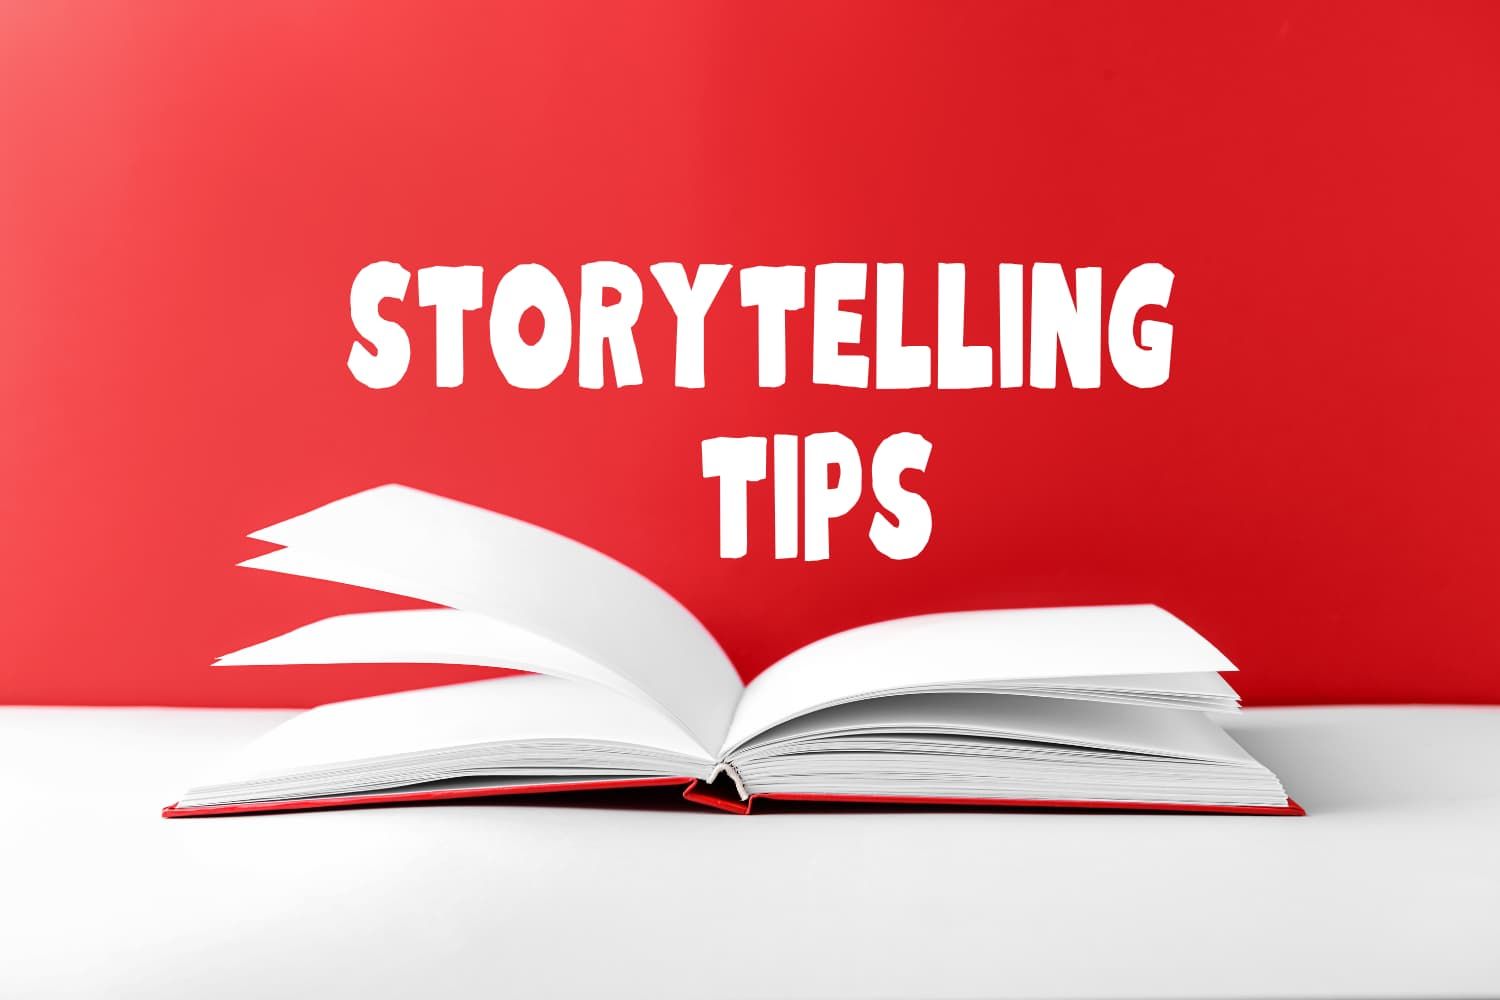 Storytelling%20tips%20-%20NT%20The%20pharisee%20and%20the%20tax%20collector%20-%20Teaching%20the%20parable%20of%20the%20tax%20collector%20and%20pharisee-bb2ec4e5 Self-image / identity